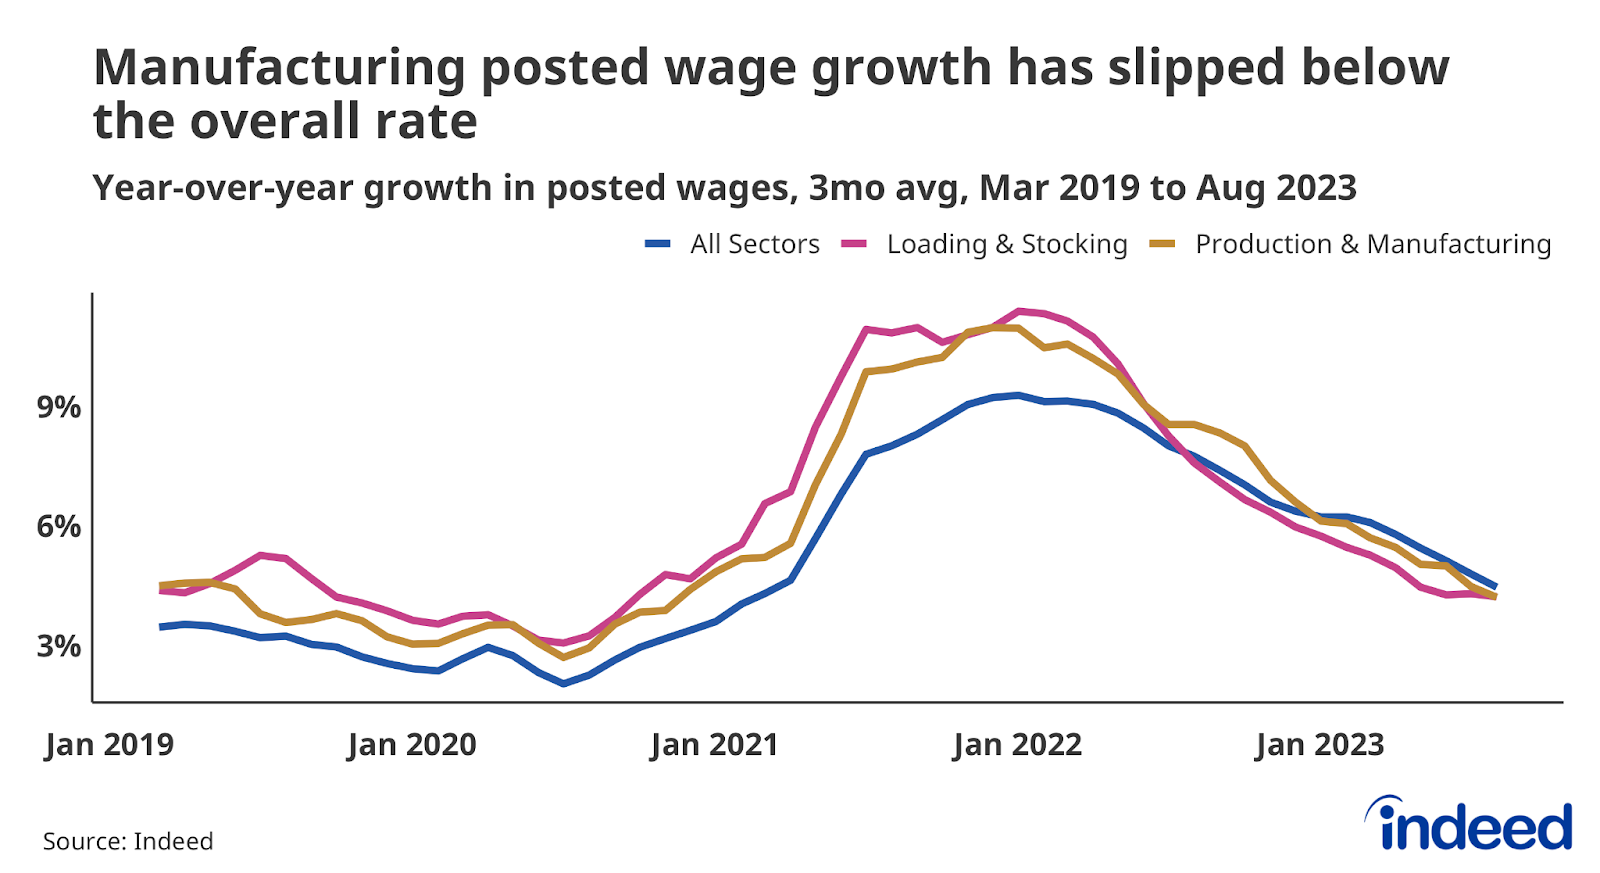 A line graph titled “Manufacturing posted wage growth has slipped below the overall rate” shows year-over-year growth in posted wages for jobs across all sectors, loading & stocking, and production & manufacturing. Posted wage growth in production & manufacturing outpaced the overall average for several years, but it is now slipping behind the total rate.